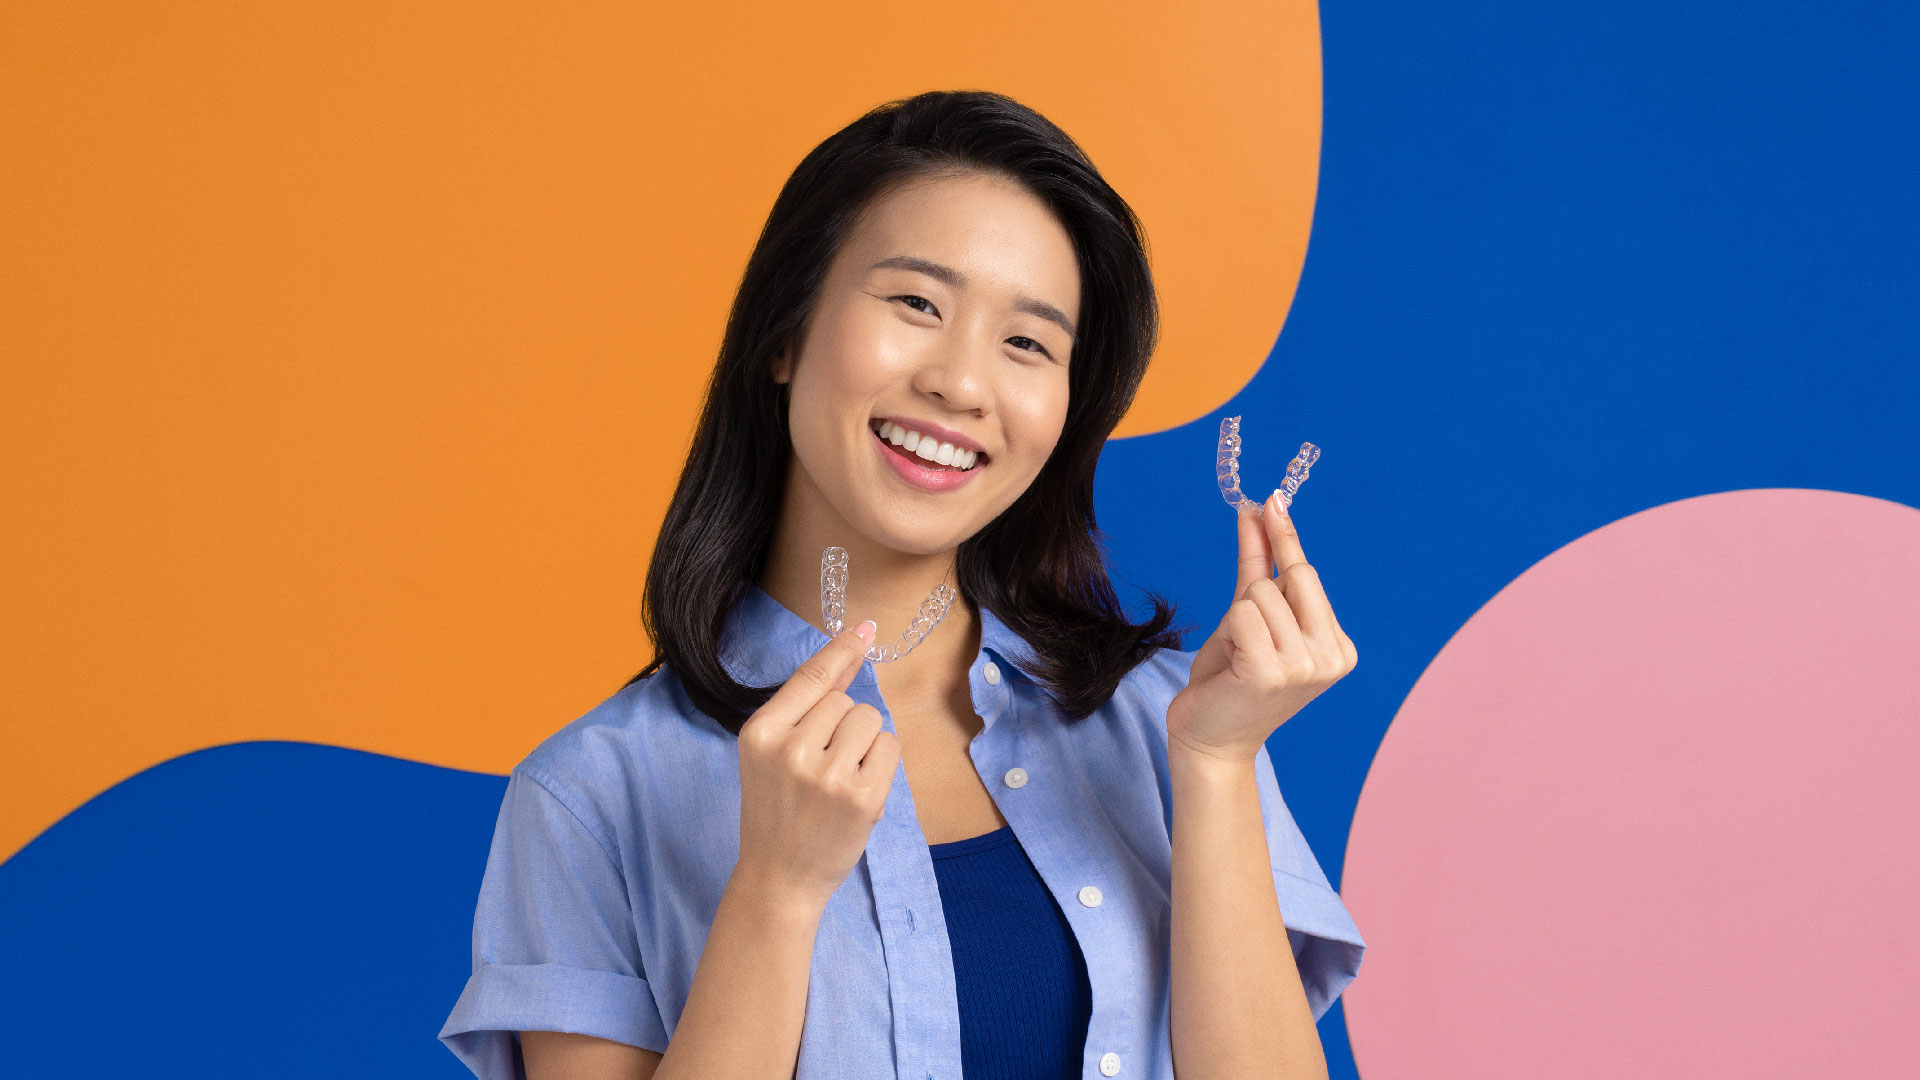 Female person holding up clear aligners in both hands